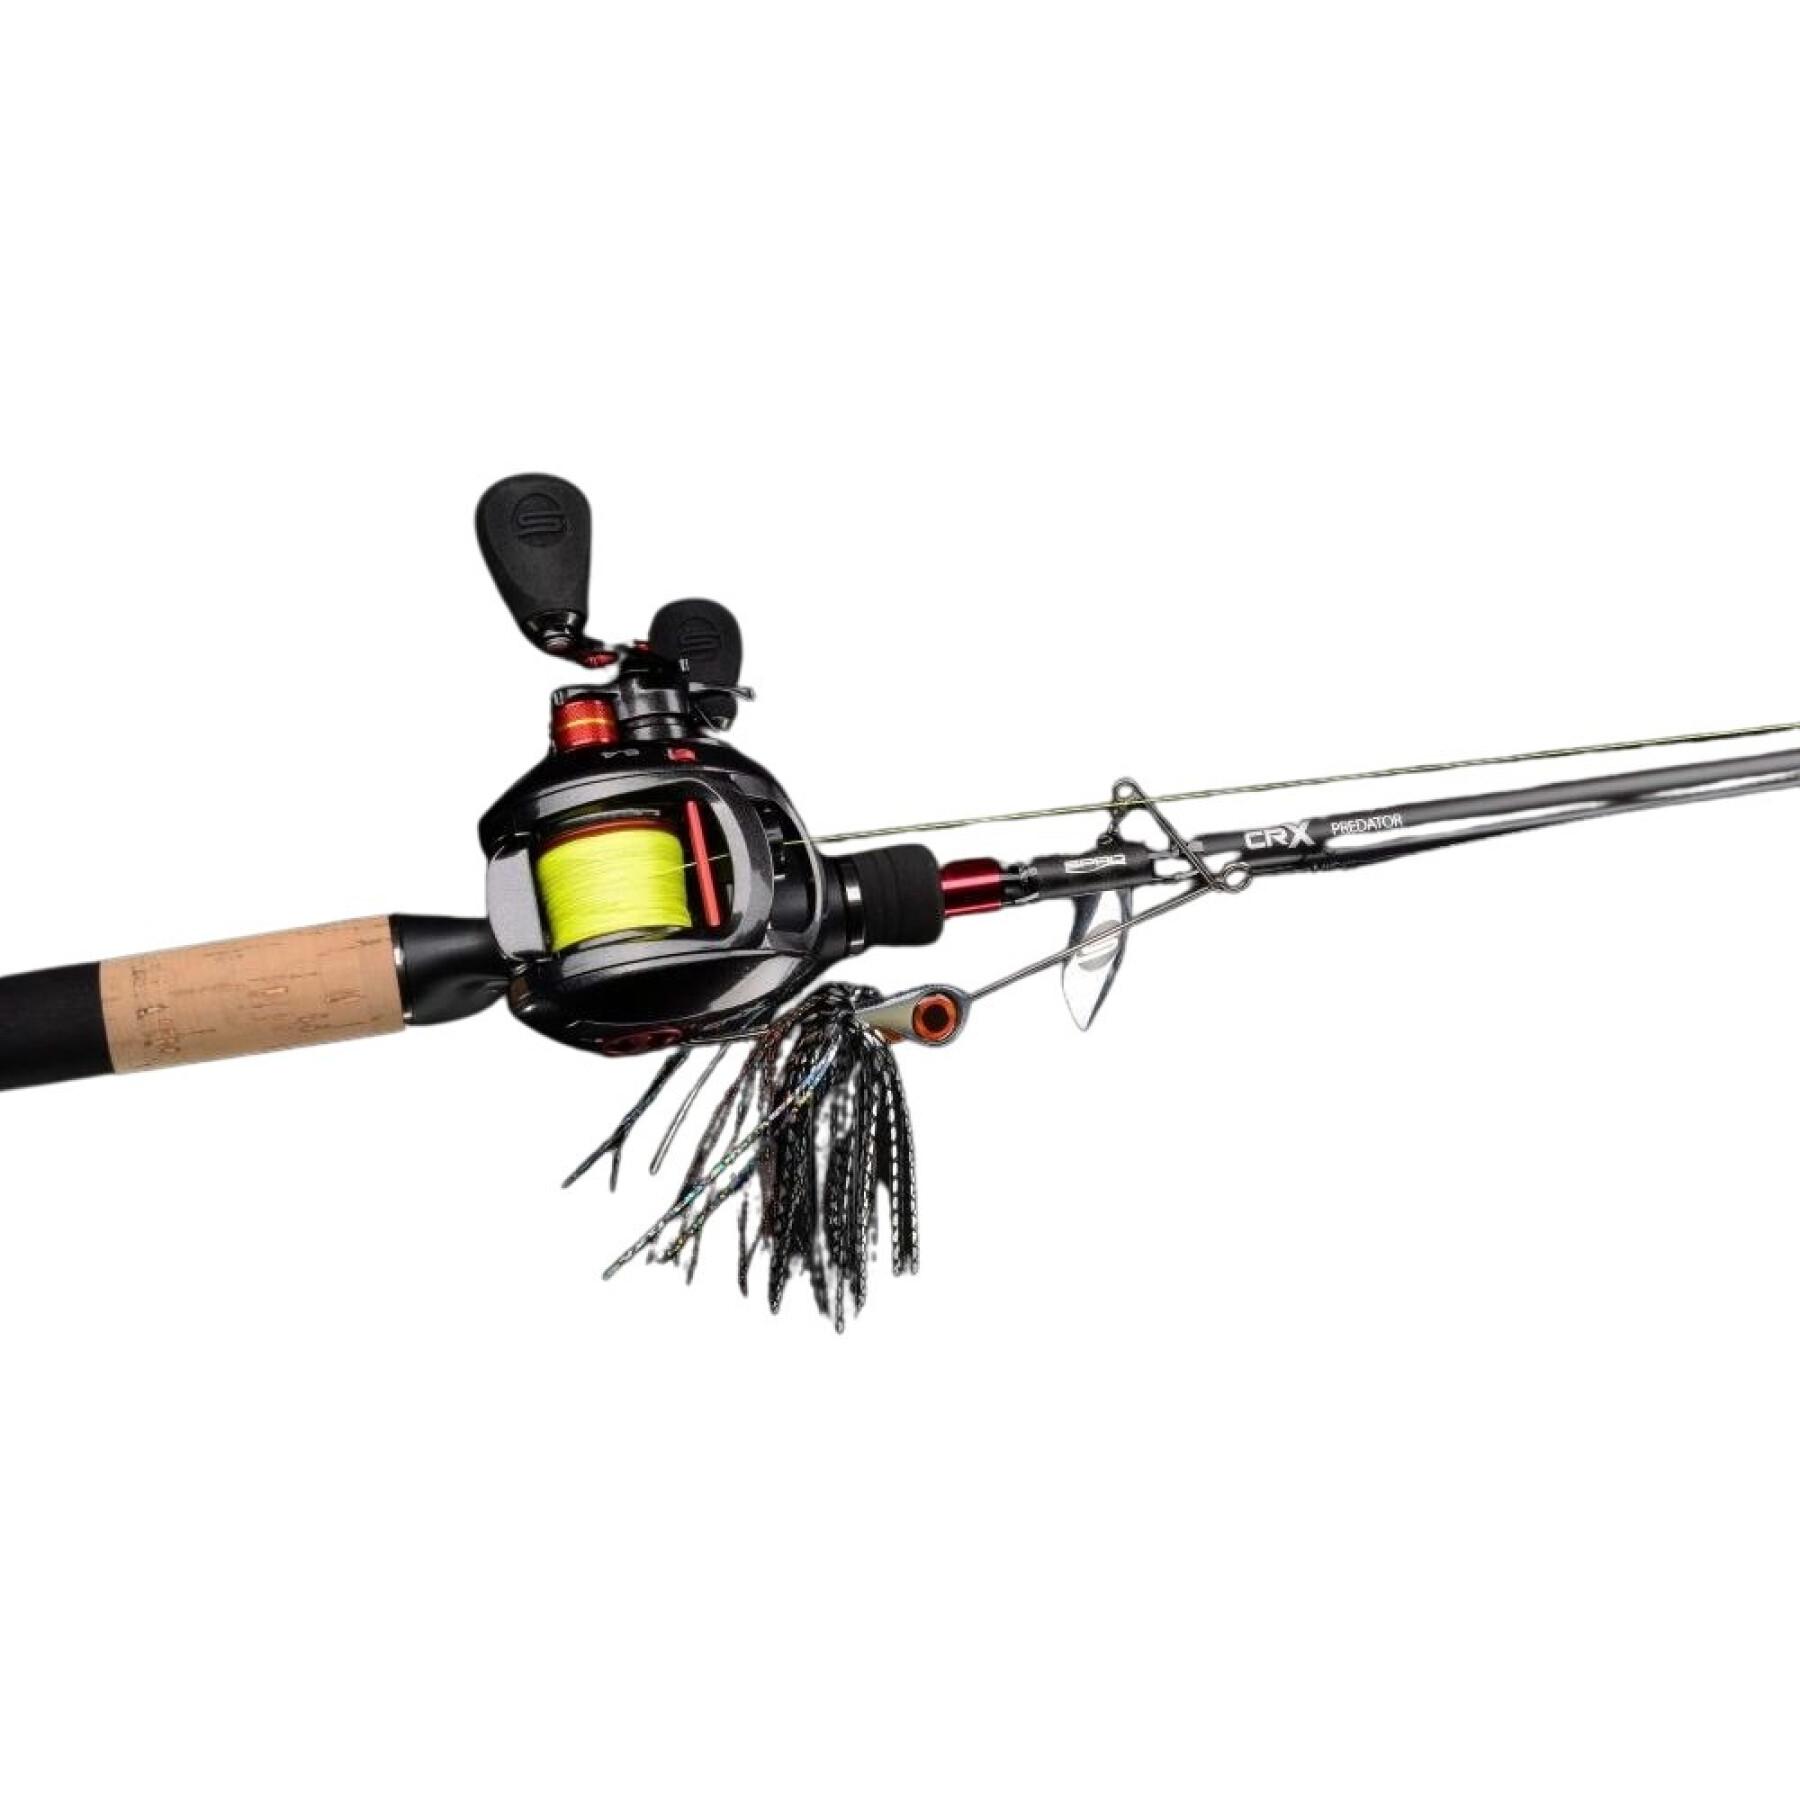 Canne casting Spro crx lure & cast 30-70g - Casting - Cannes